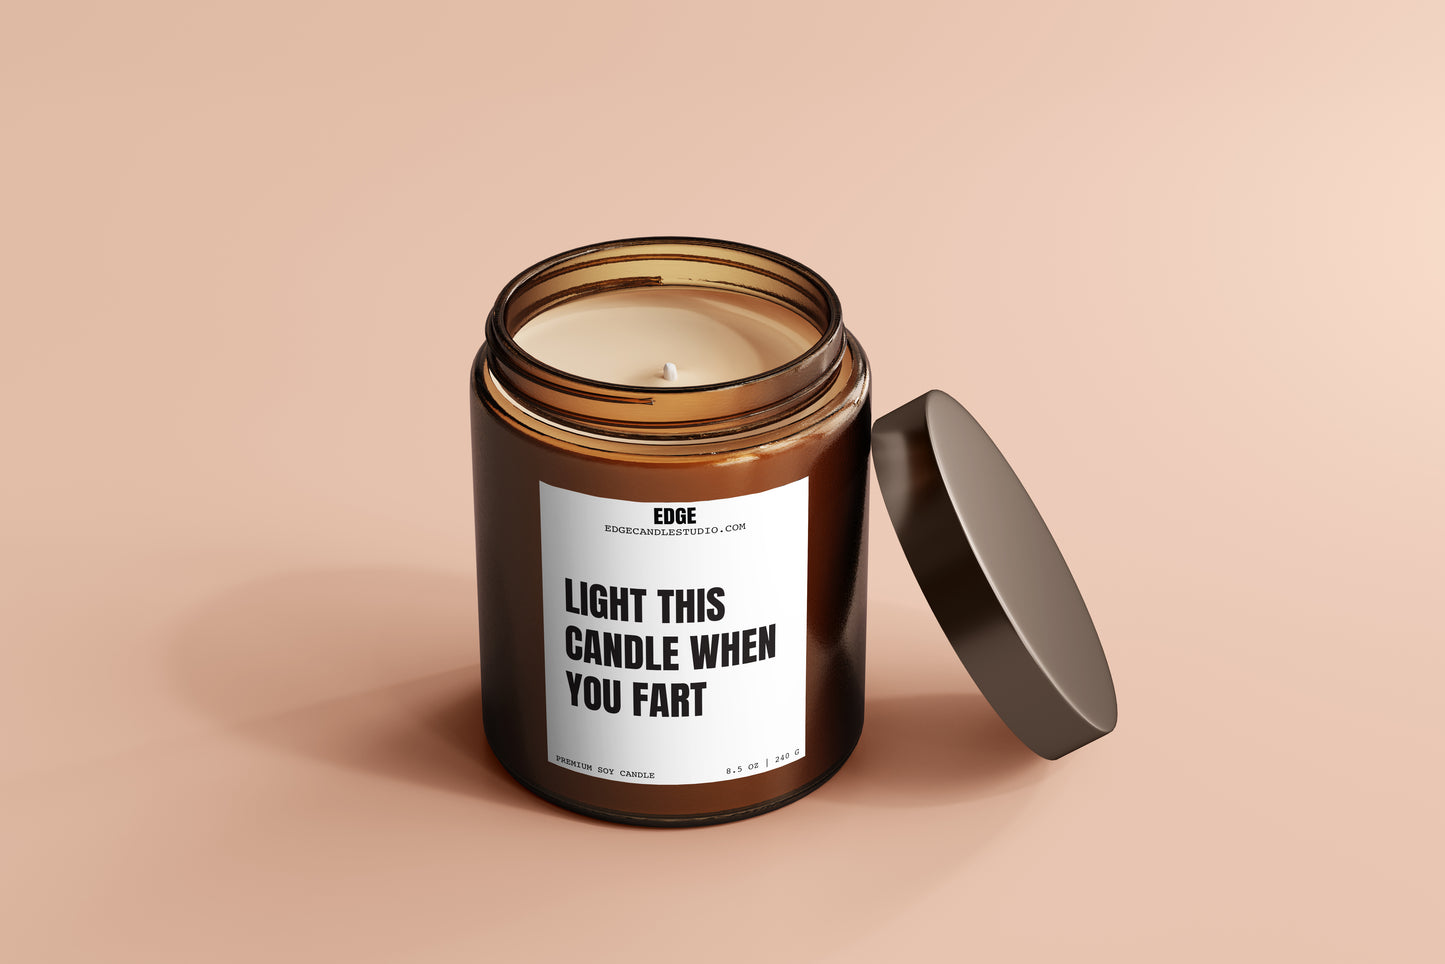 Light This Candle When You Fart